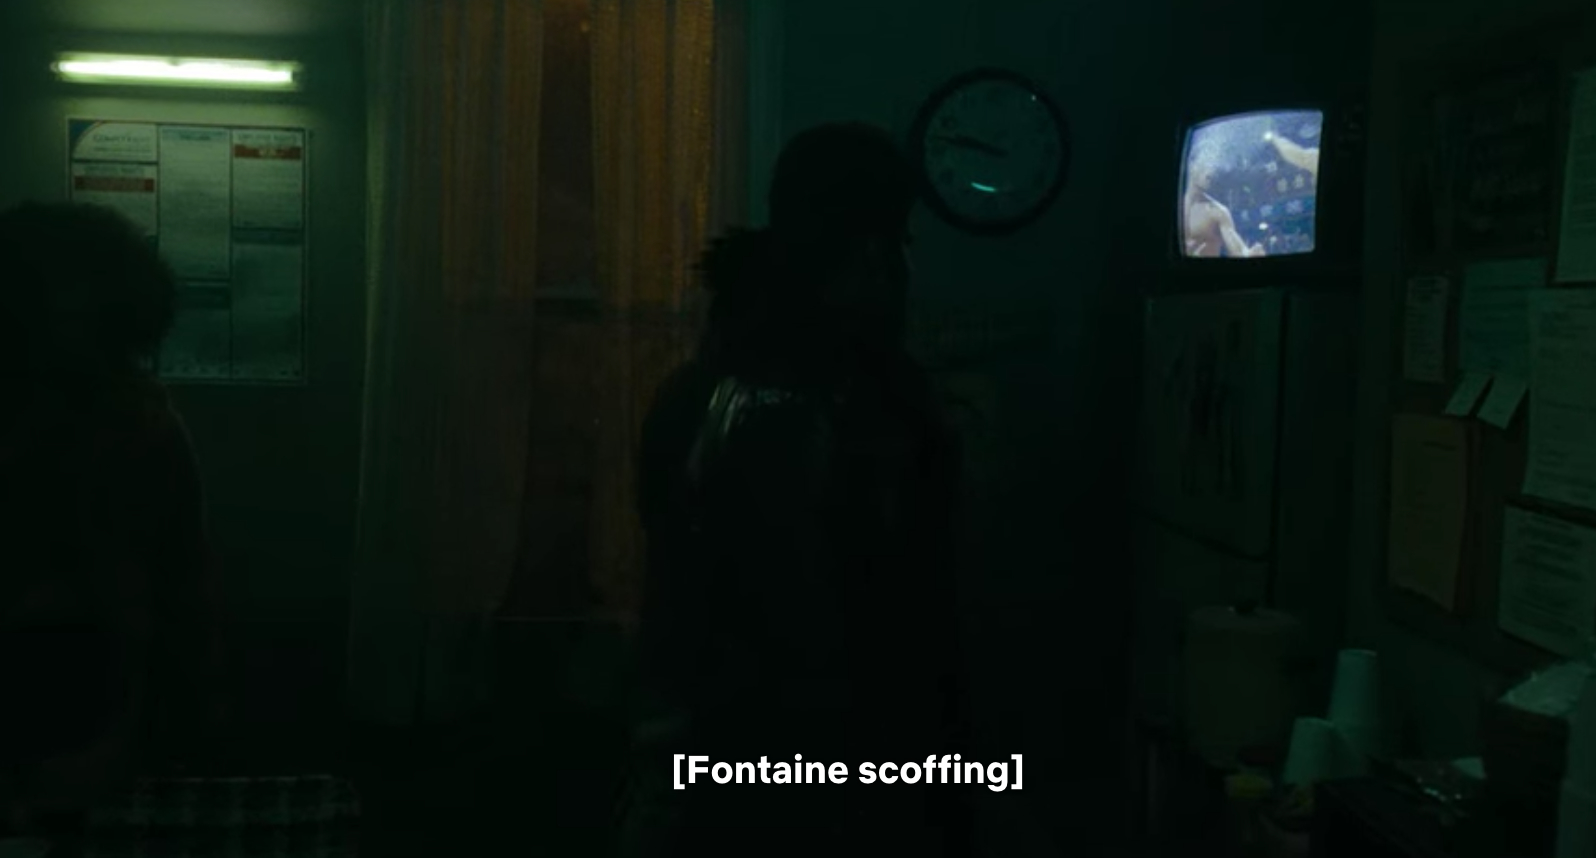 A dark room with a television on showing a movie